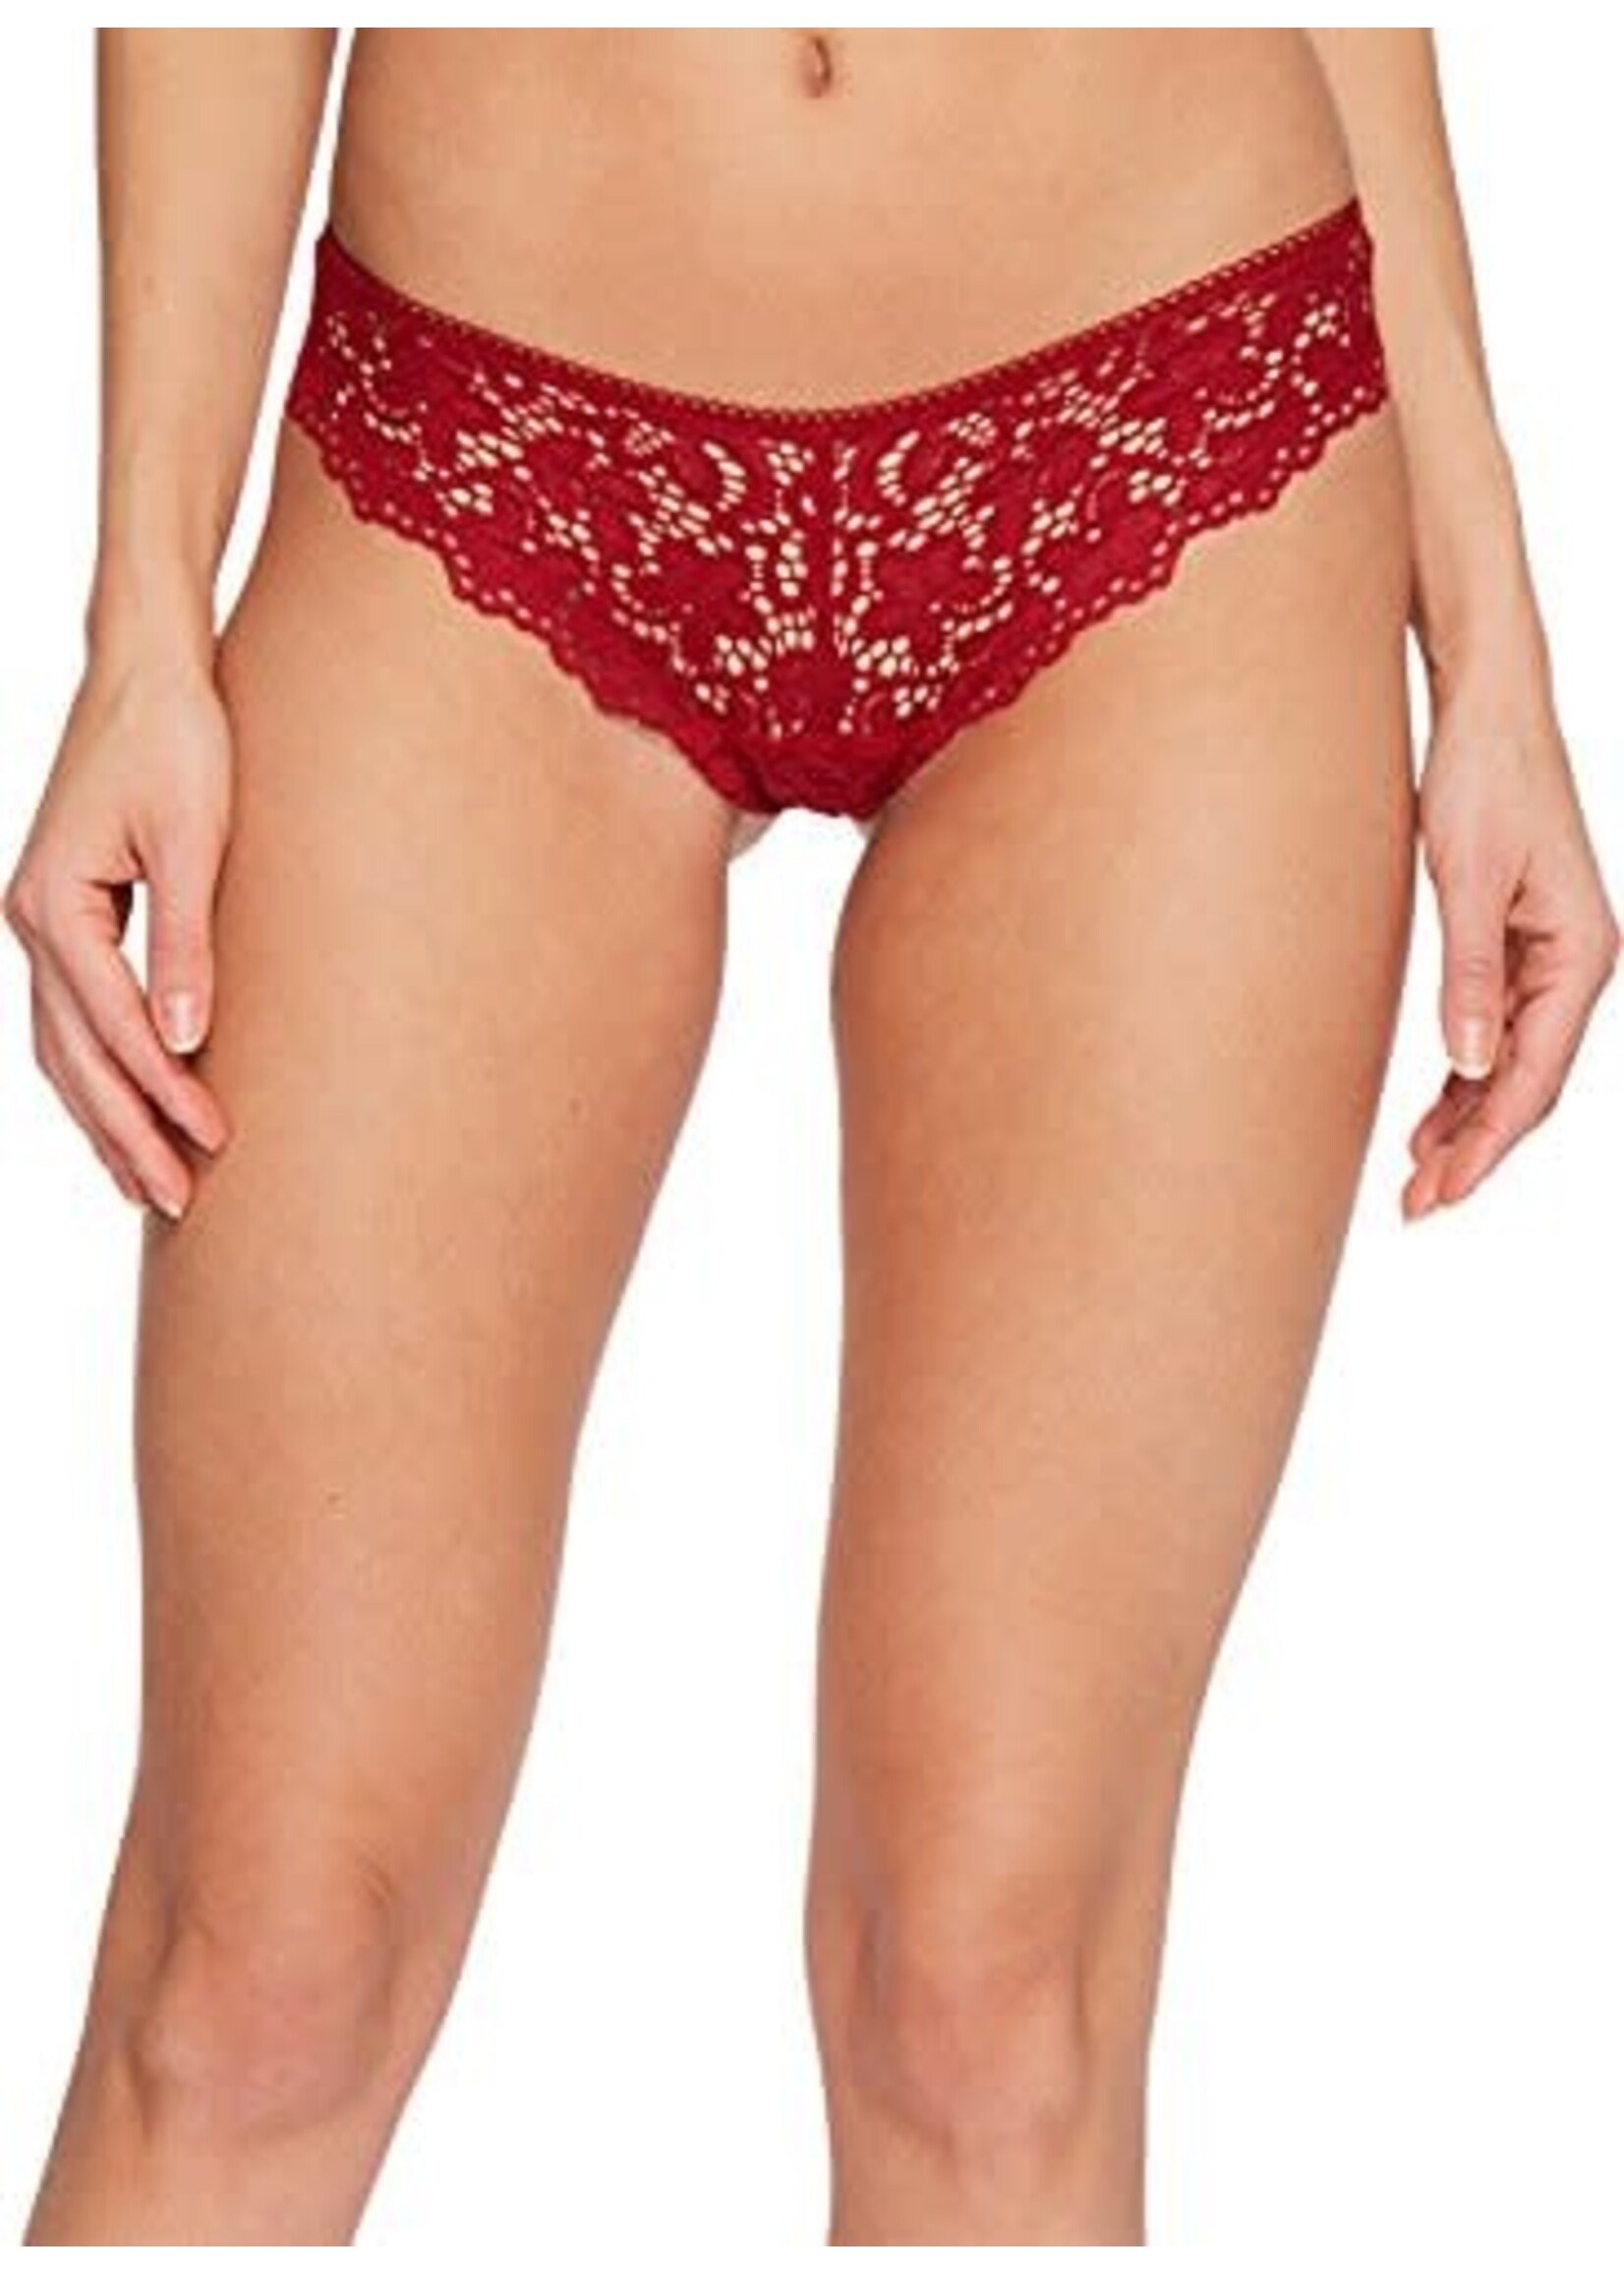 DKNY DKNY Red Lace Thong, M